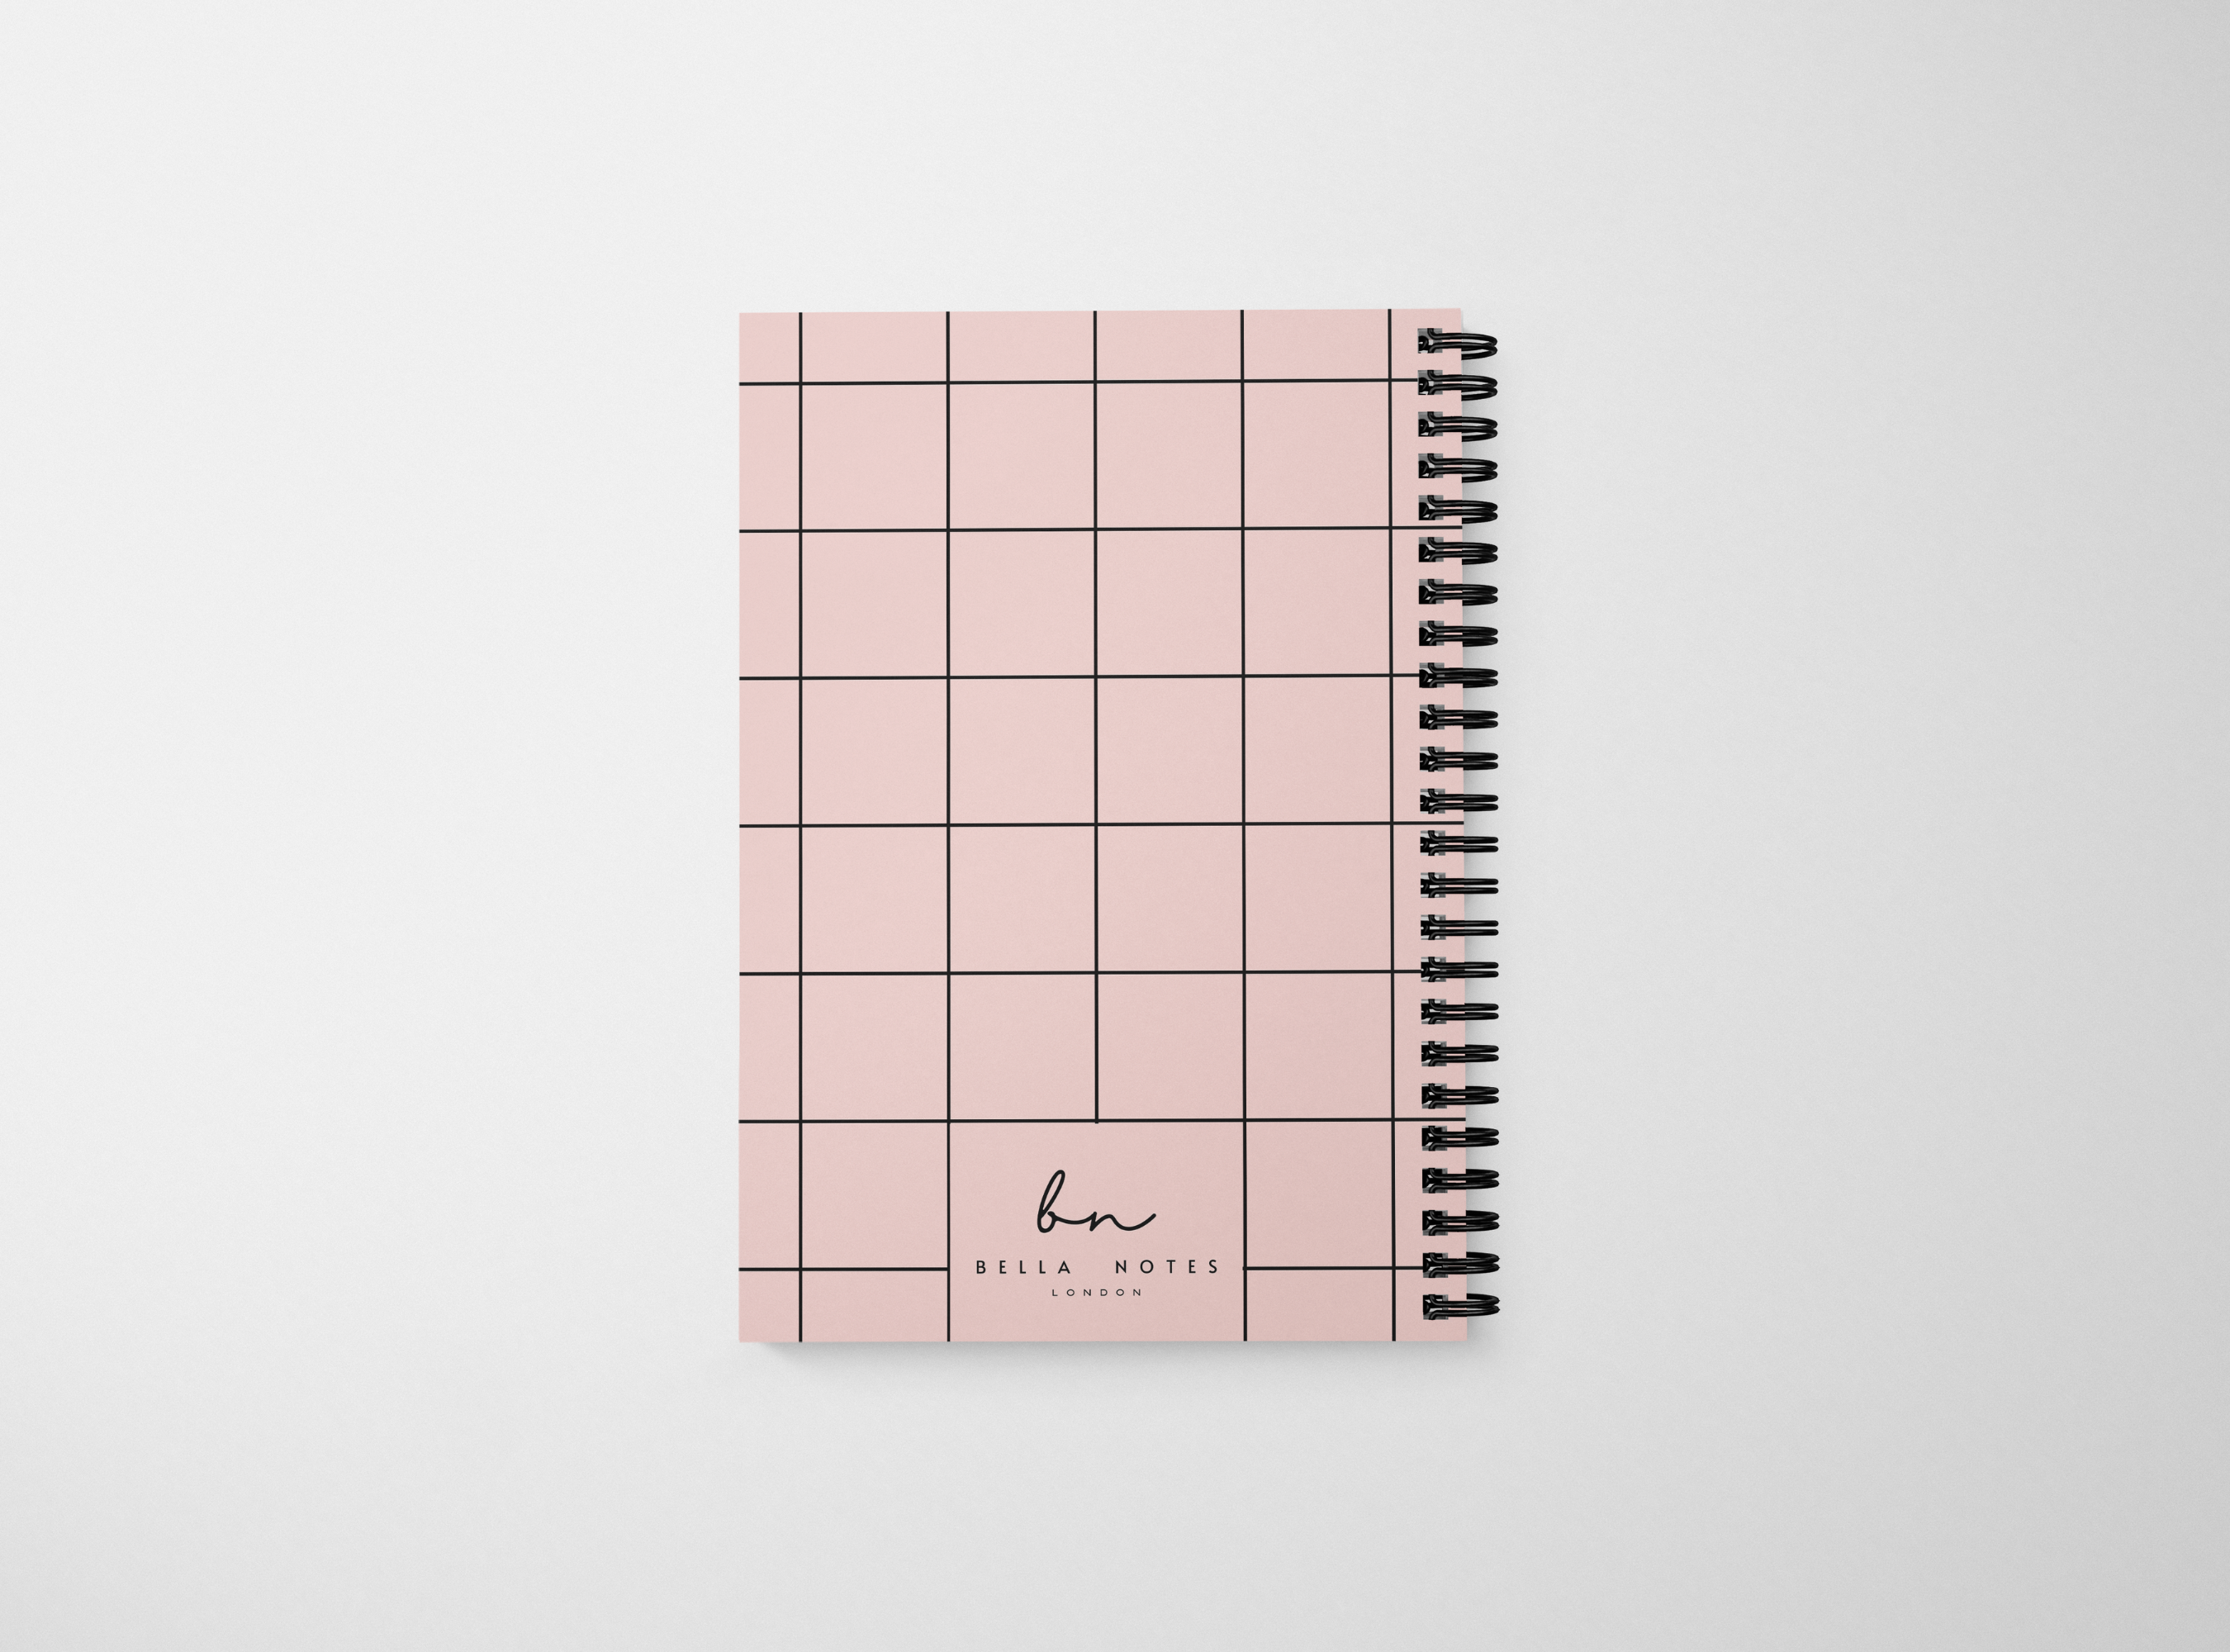 Cast Your Cares Notebook